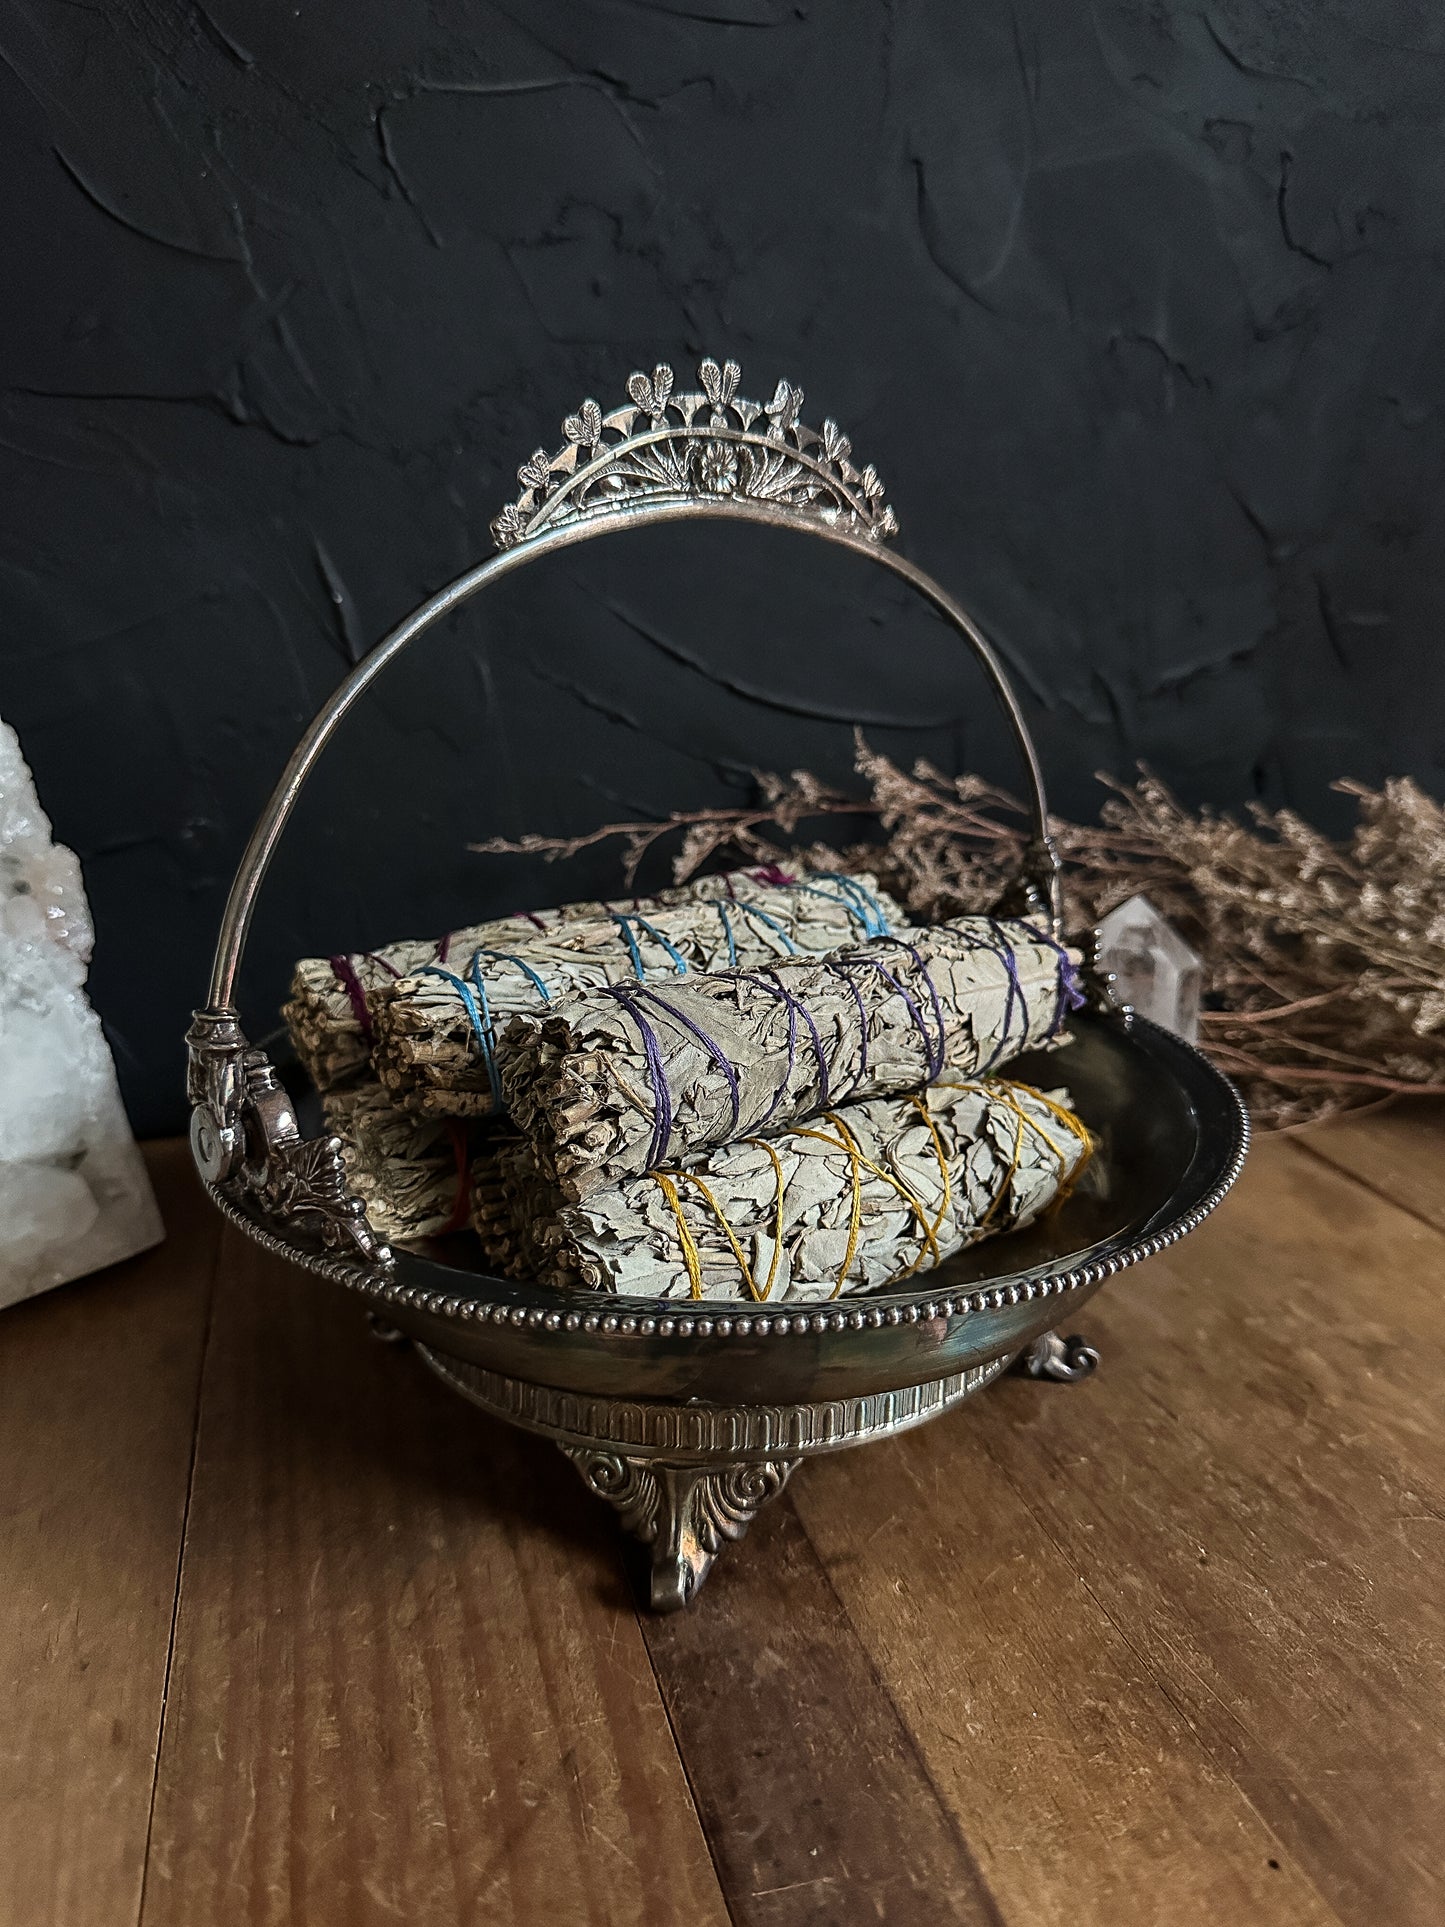 This bowl is often referred to as a Victorian Bride’s Bowl (or basket), because it was a popular wedding gift.